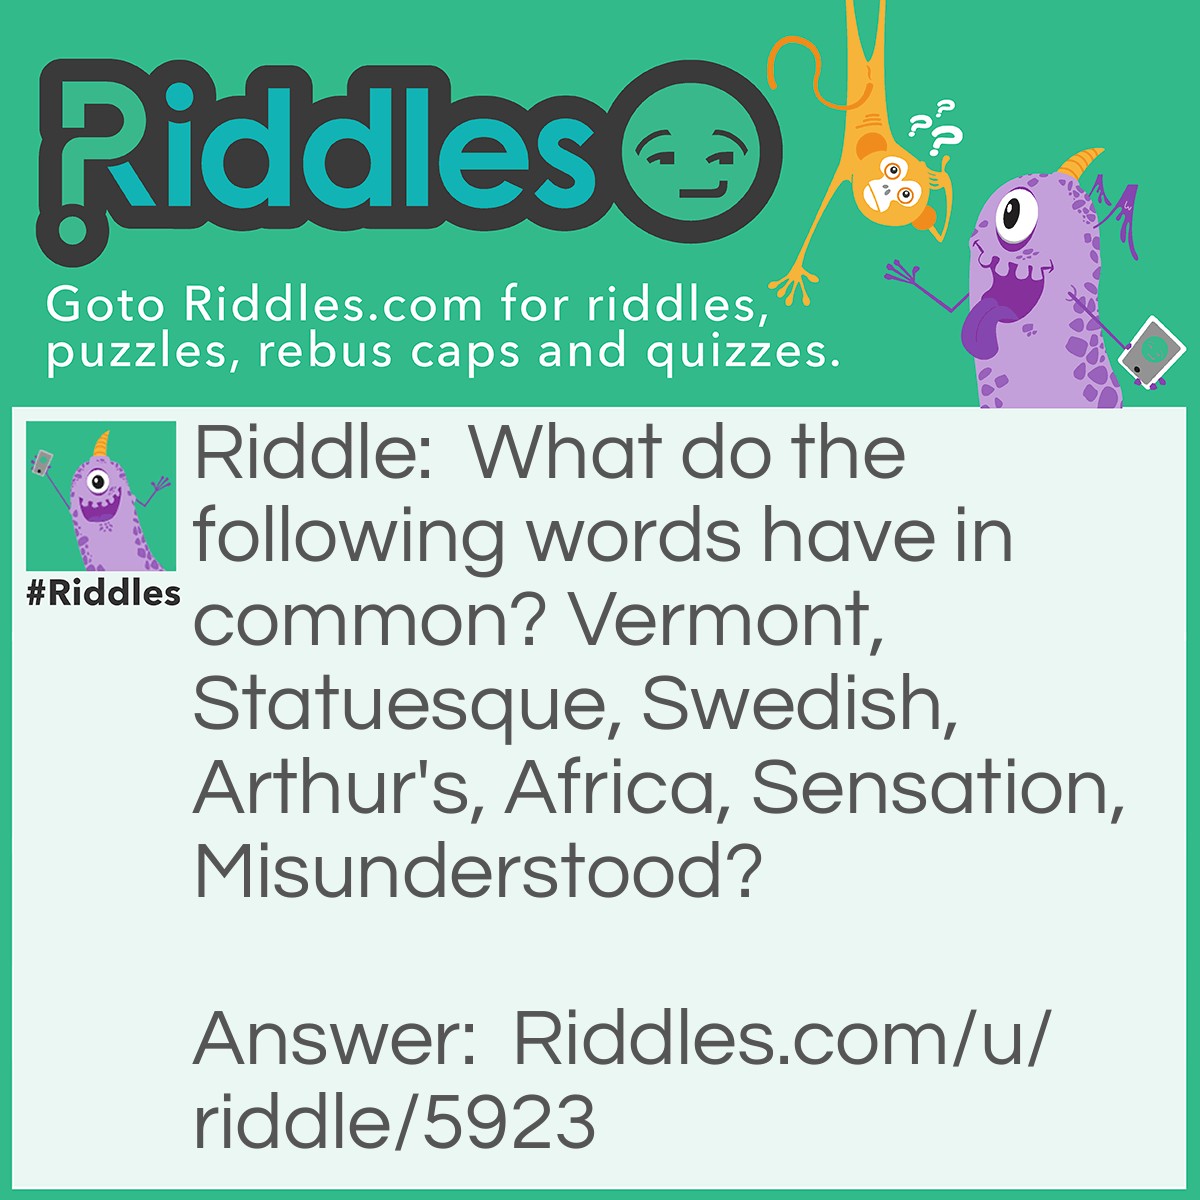 Riddle: What do the following words have in common? Vermont, Statuesque, Swedish, Arthur's, Africa, Sensation, Misunderstood? Answer: They each contain an abbreviation of a day of the week. verMONt, staTUESque, sWEDish, arTHUR’S, aFRIca, senSATion, miSUNderstood.